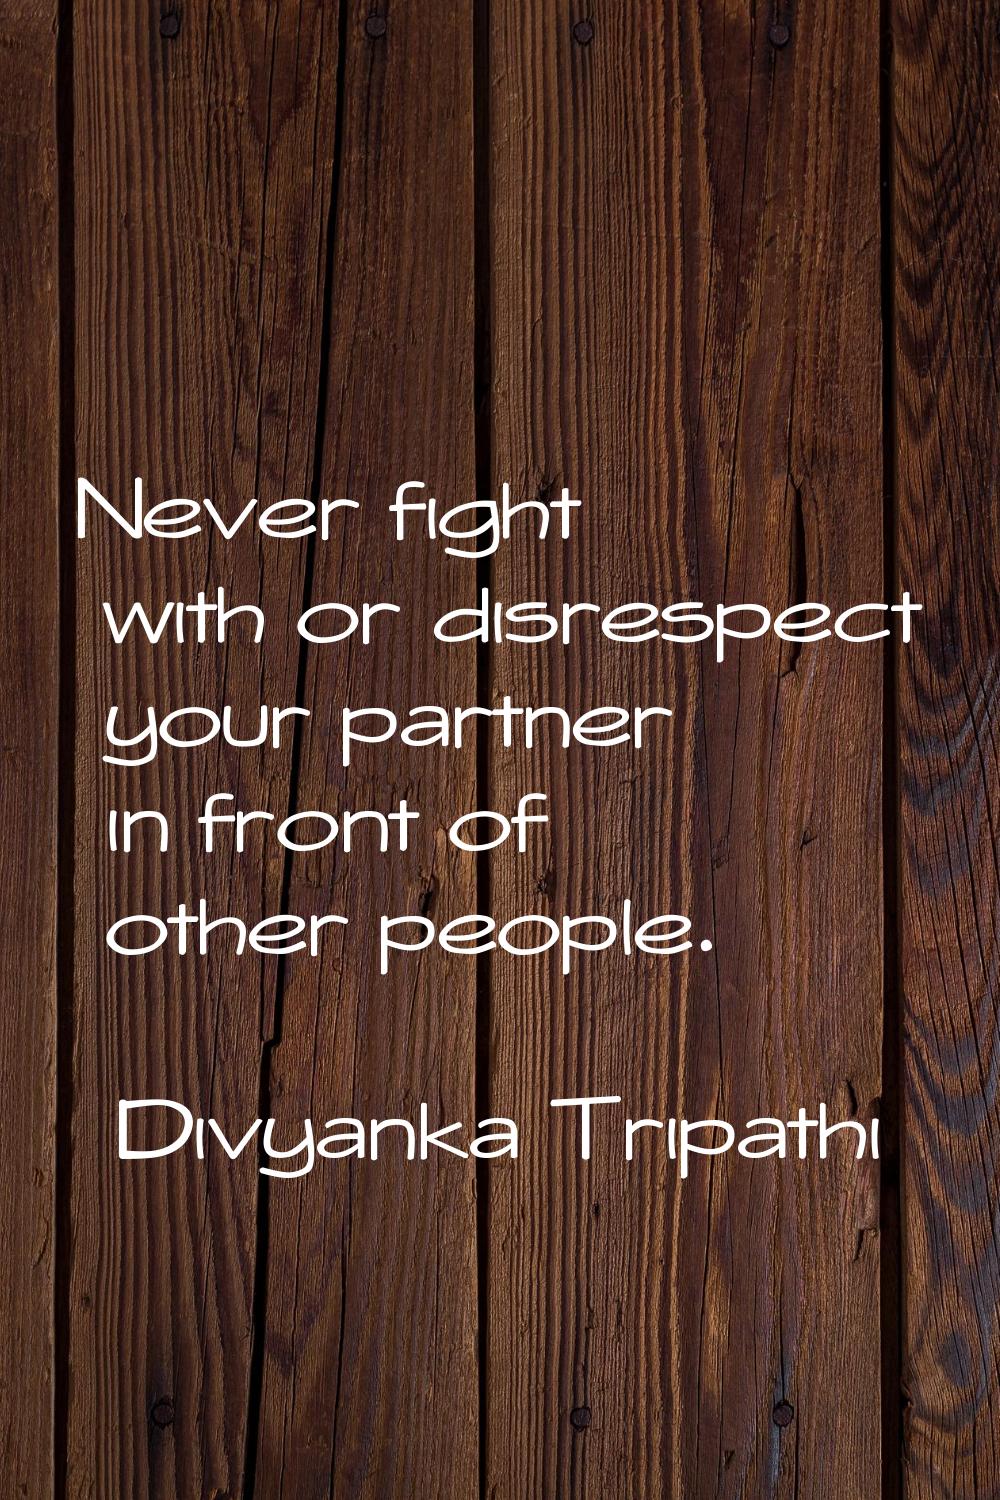 Never fight with or disrespect your partner in front of other people.